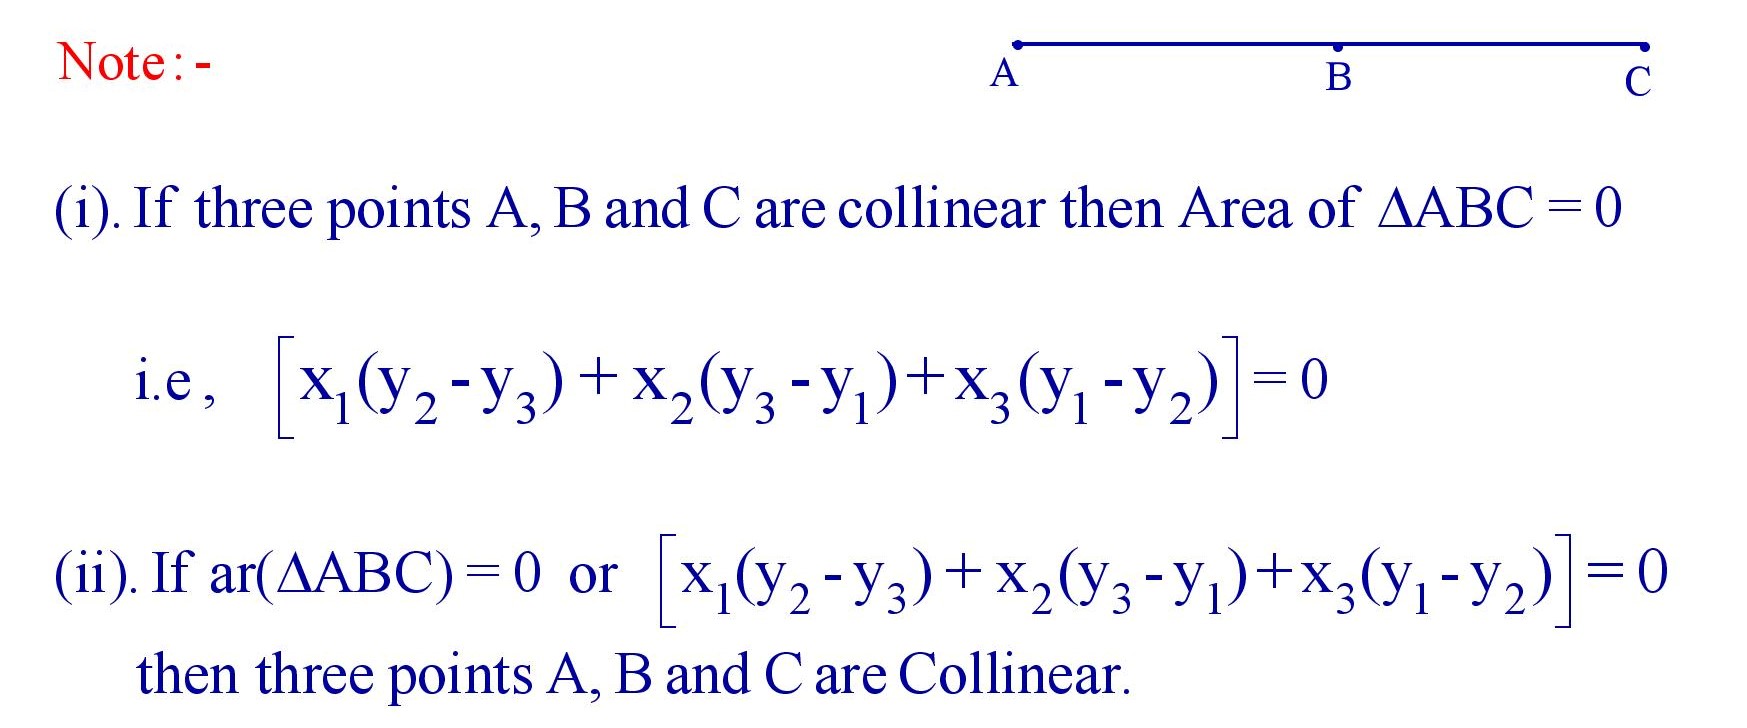 If three points A, B and C are collinear then